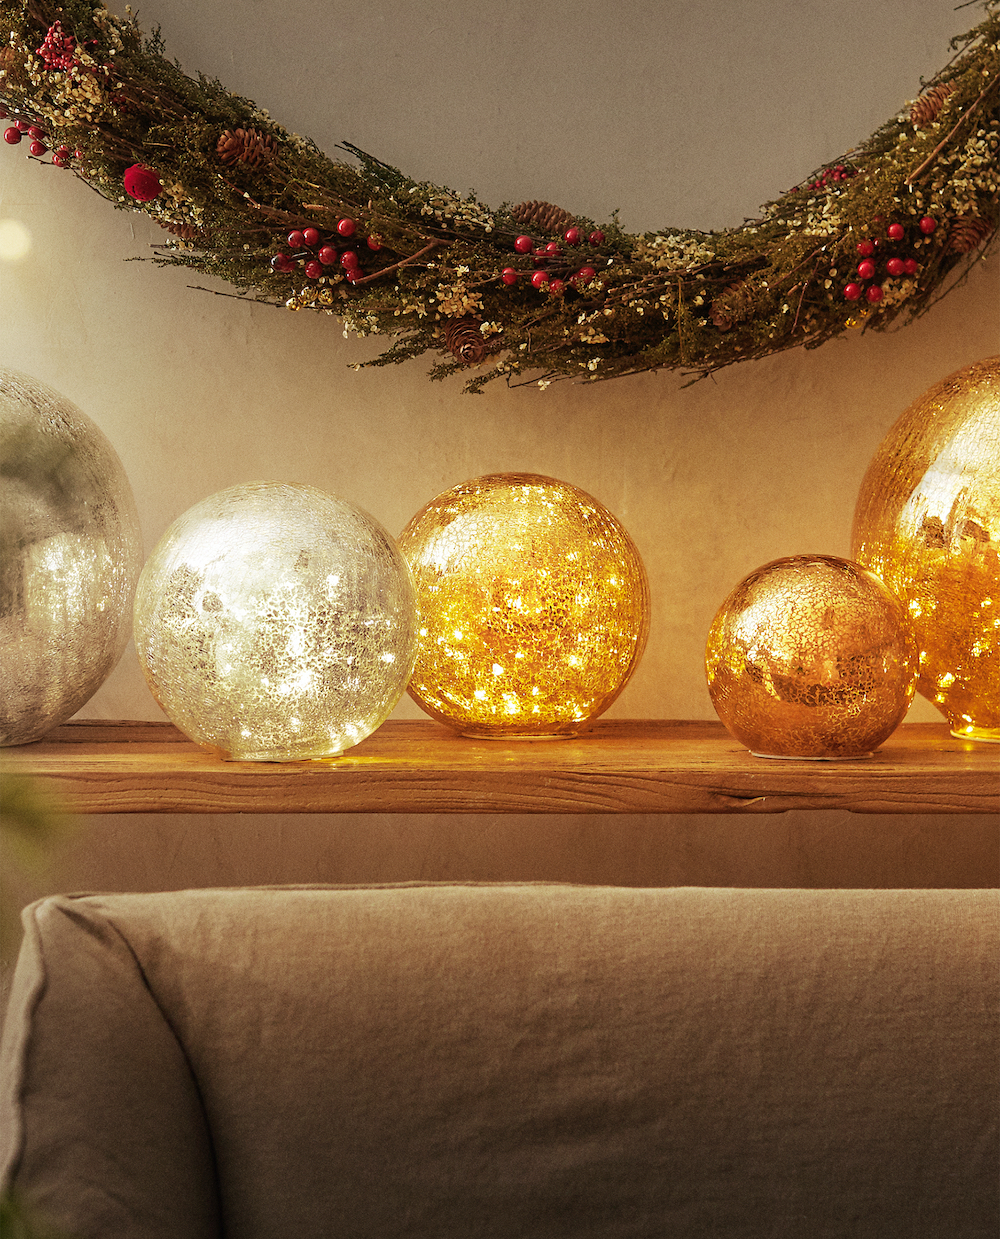 Zara Home interior crackled glass light Christmas ornaments on a wooden shelf above a beige couch back and a long Christmas garland hanging on the wall